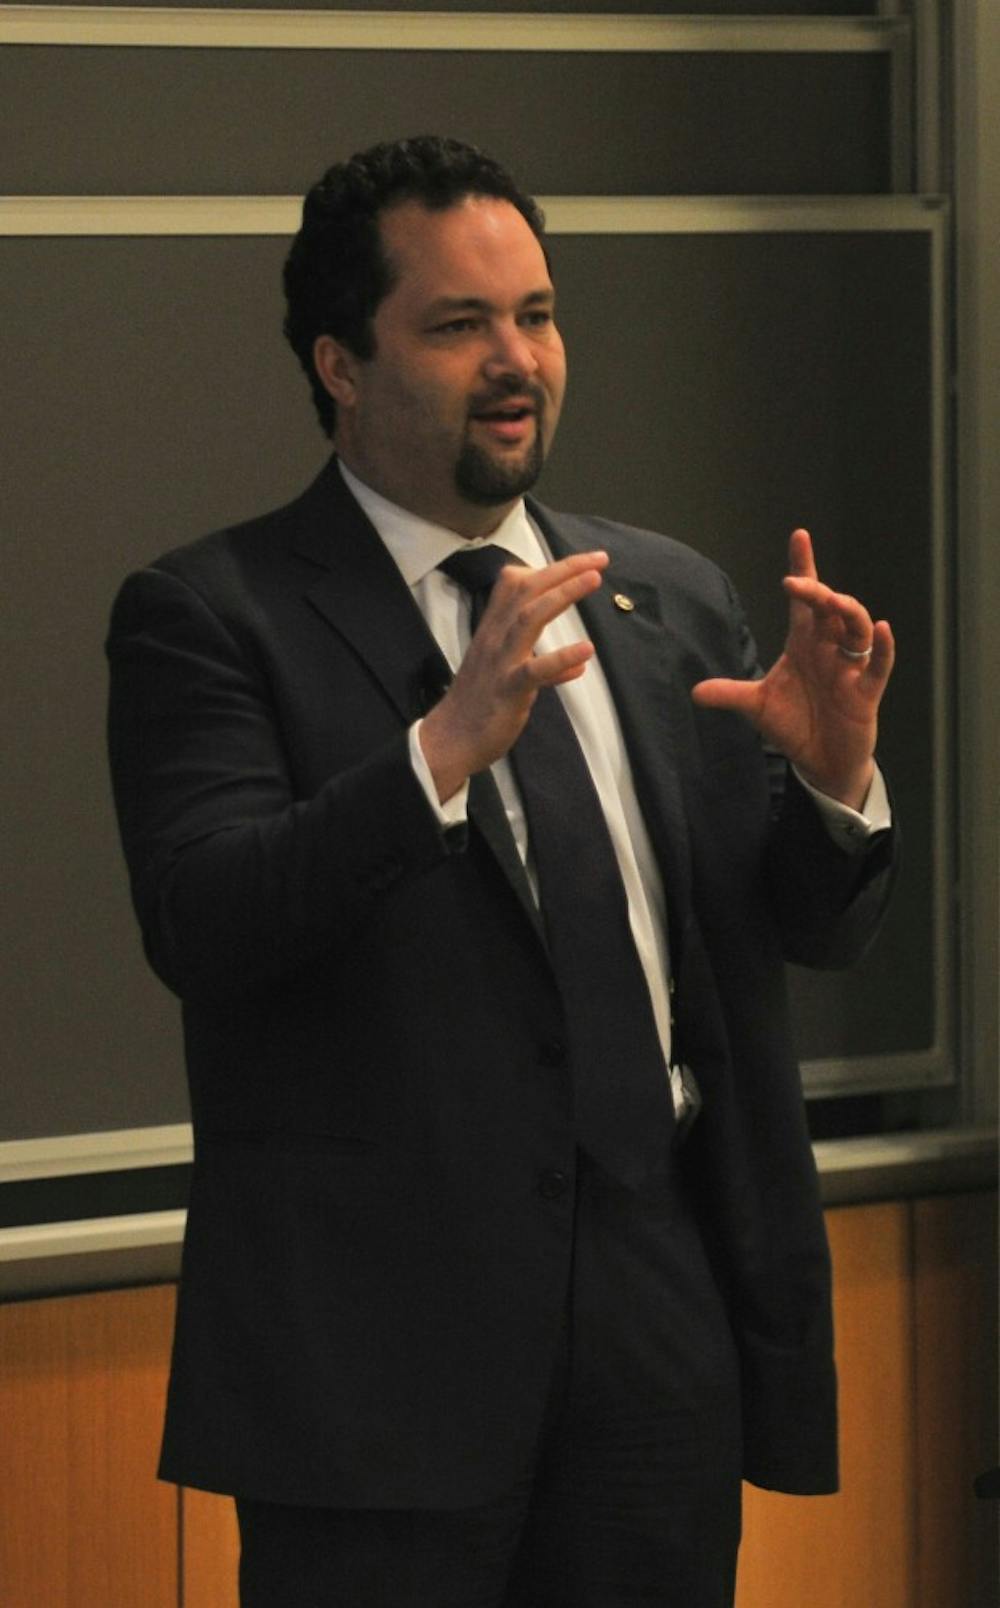 NAACP President and CEO Benjamin Todd Jealous speaks at a Wharton Leadership Lecture